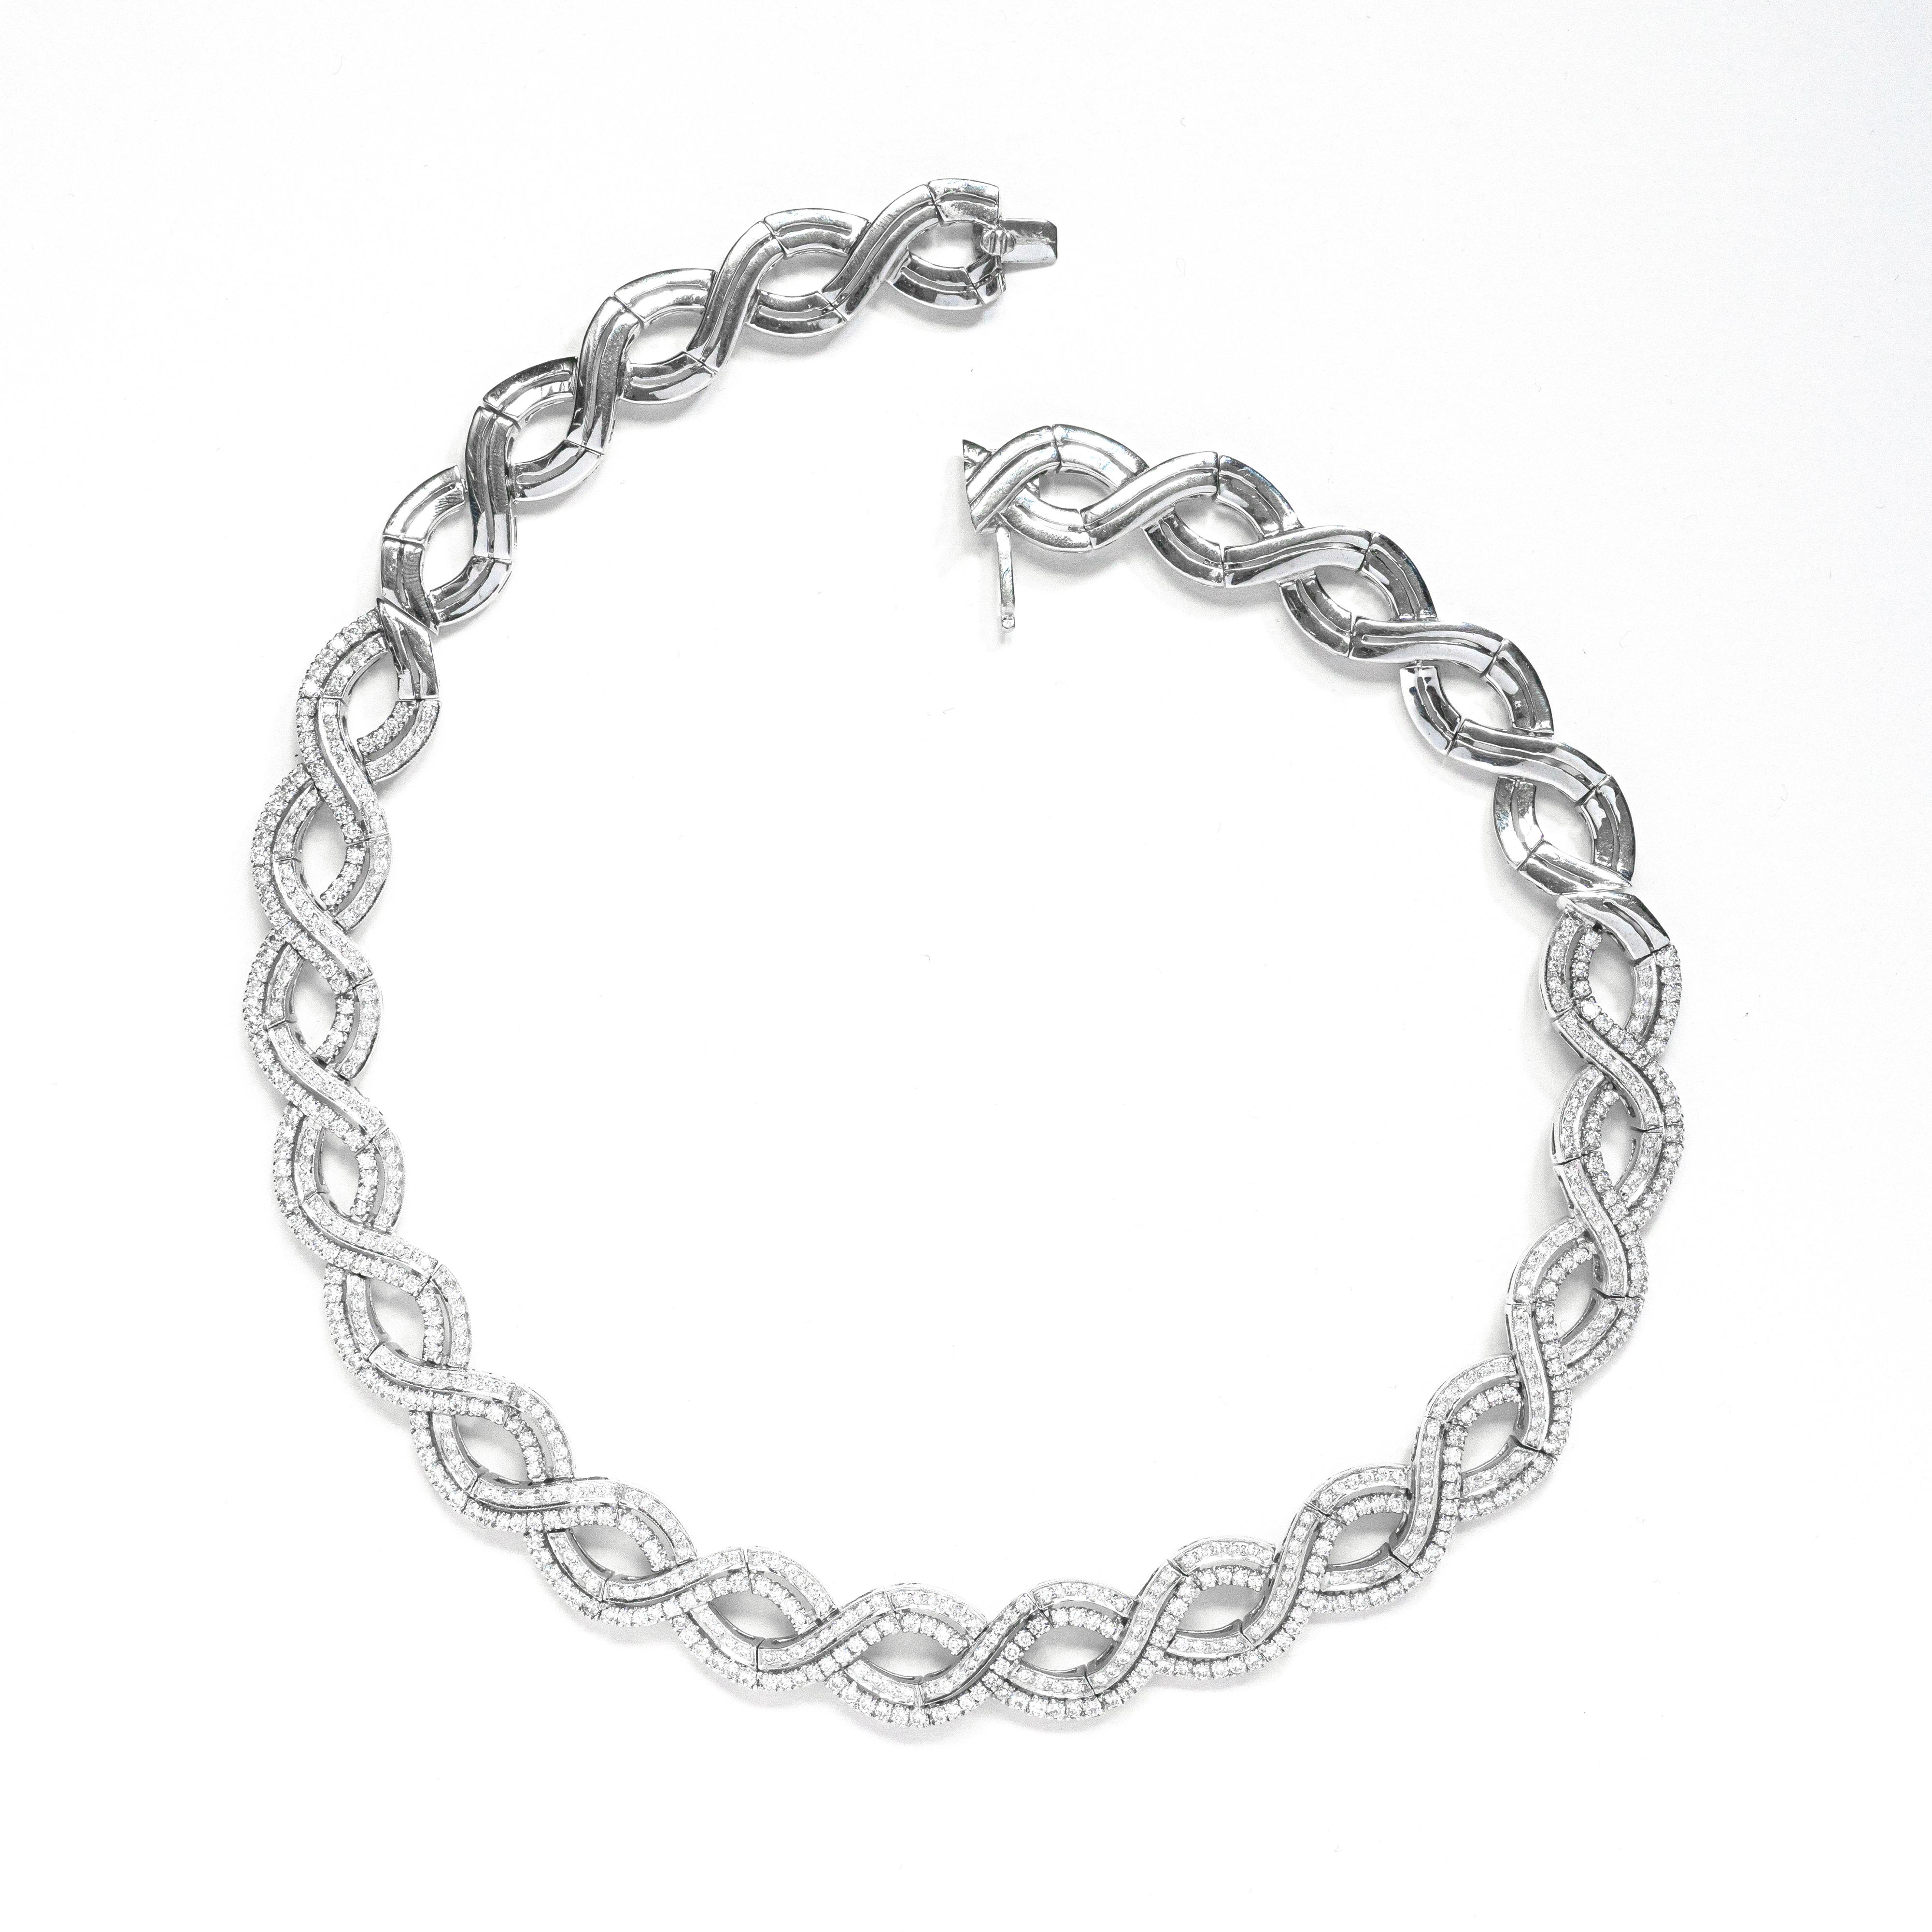 This stunning 18 carat white gold necklace features a flat twisted design enhanced by fine quality round brilliant cut diamonds shimmering throughout the frontal part of this mesmerising piece. The diamonds come to an impressive total weight of 9.88